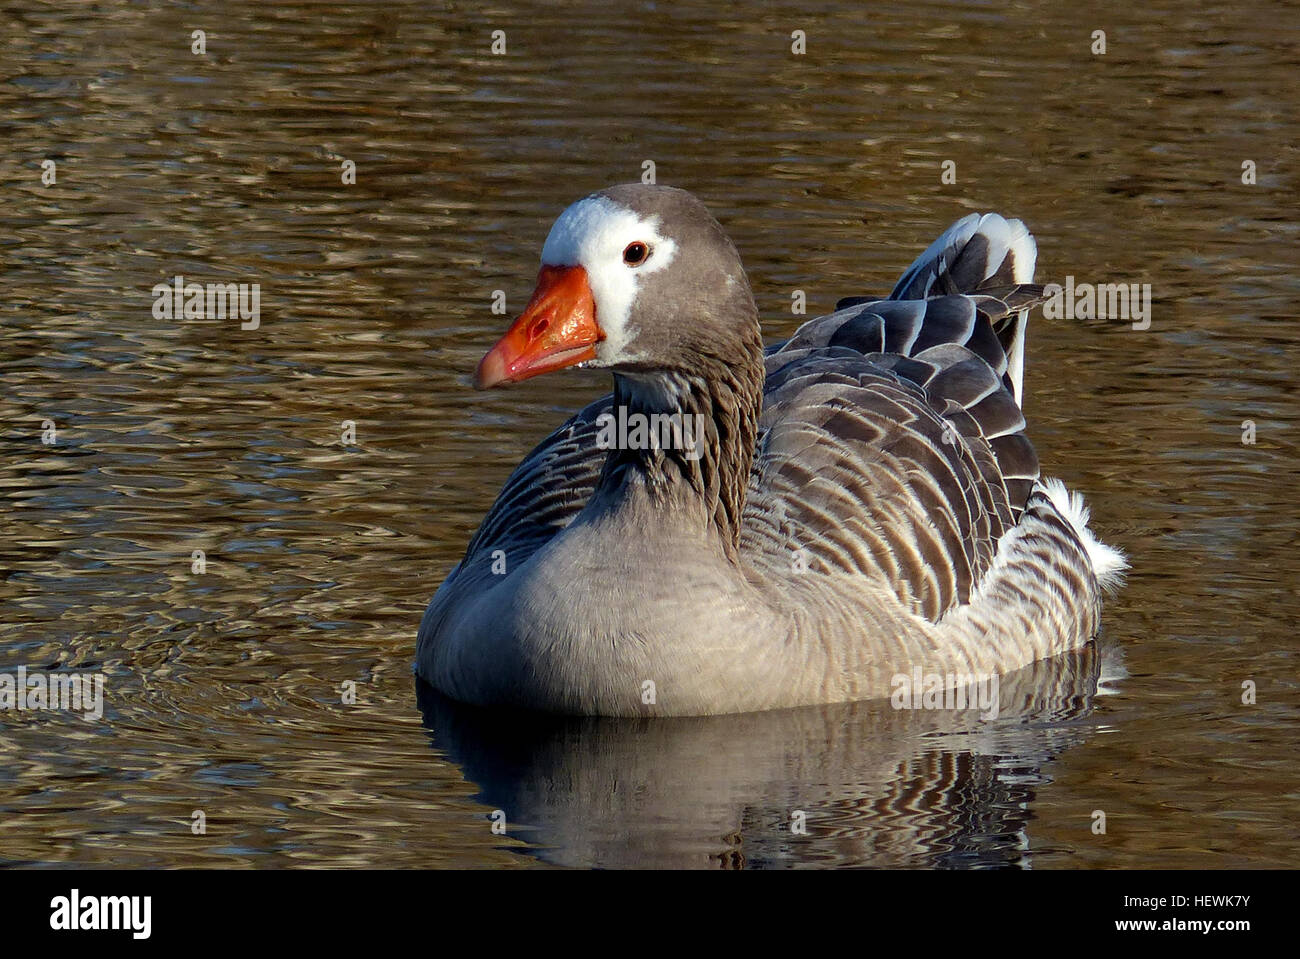 Pilgrim Geese are a breed of domestic goose. The origins of this breed are unclear, but they are thought to be either descended from stock in Europe, or developed from American stock during the Great Depression era. Stock Photo